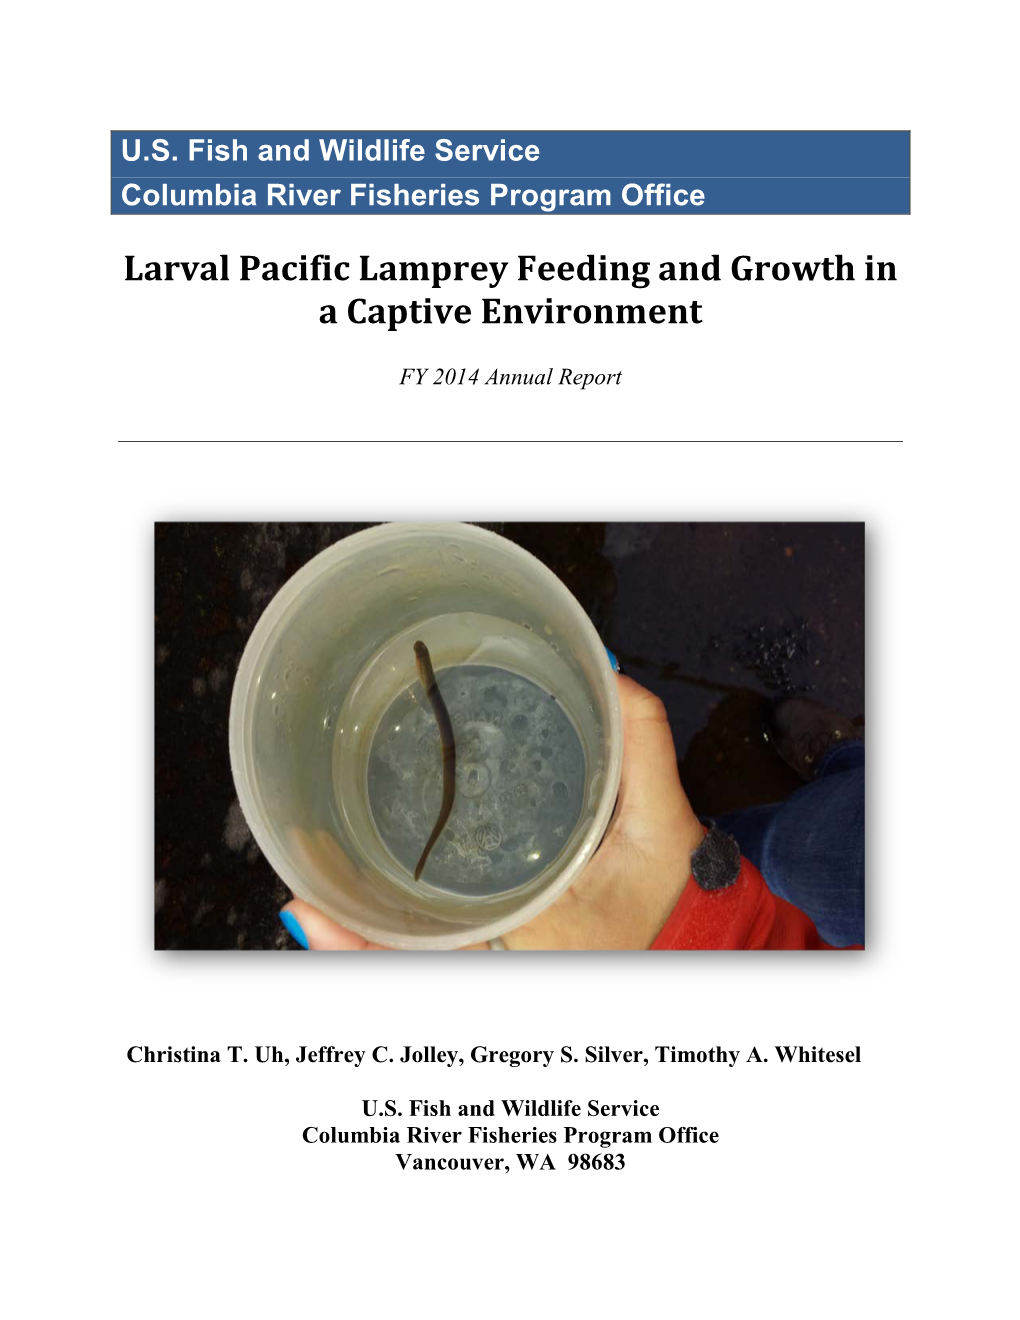 Larval Pacific Lamprey Feeding and Growth in a Captive-Reared Environment